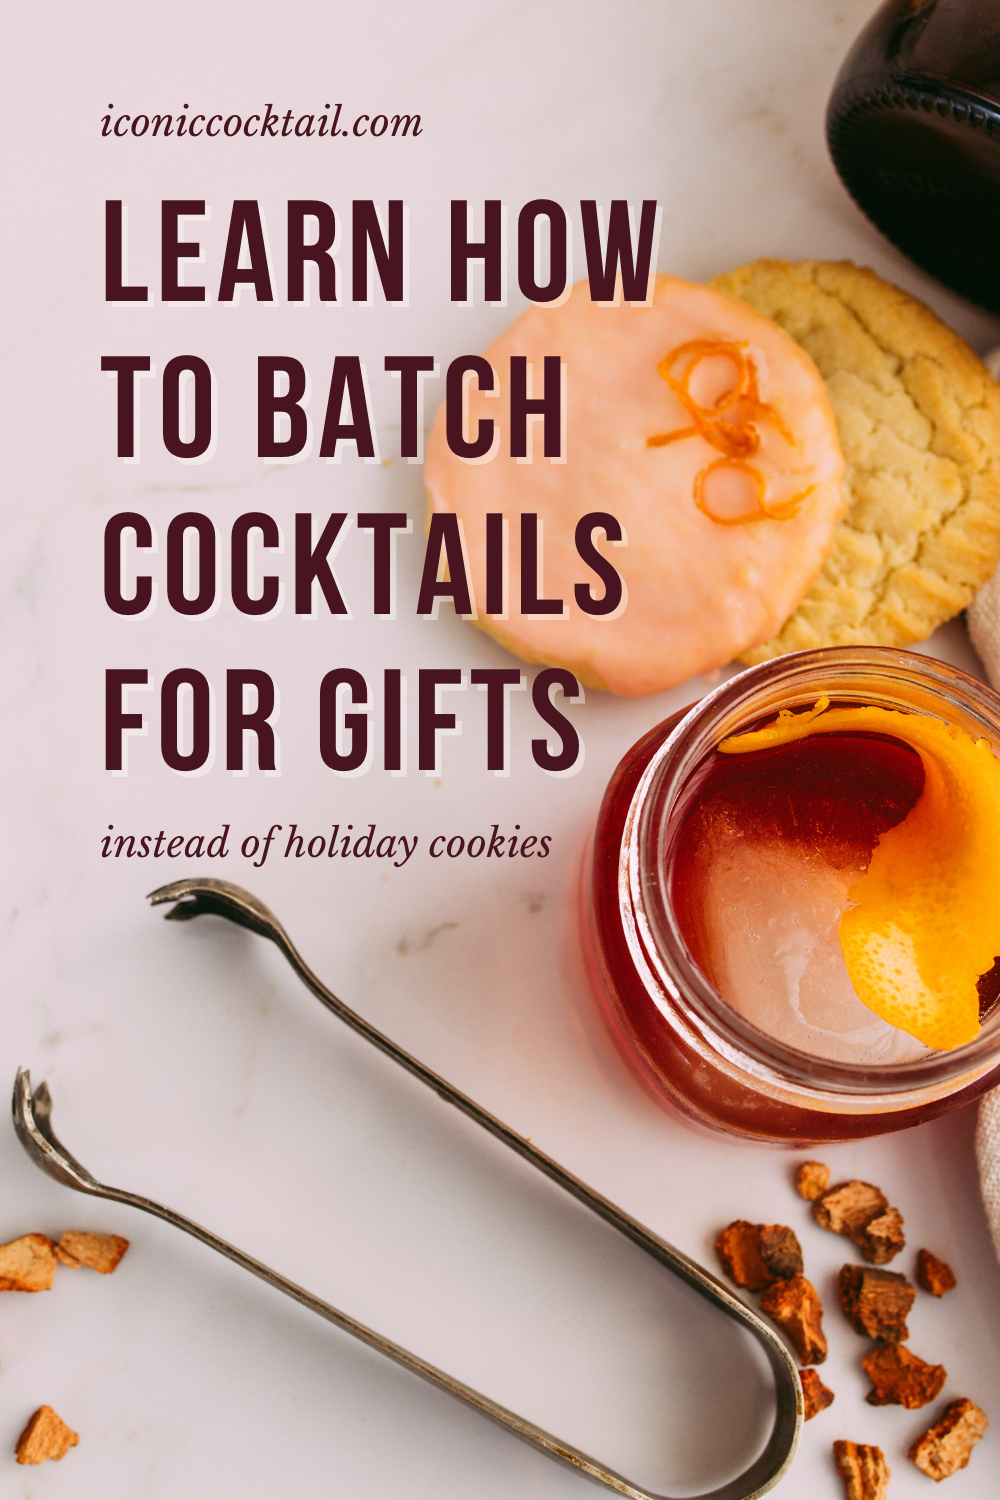 Learn How to Batch Cocktails for Gifts (instead of holiday cookies)